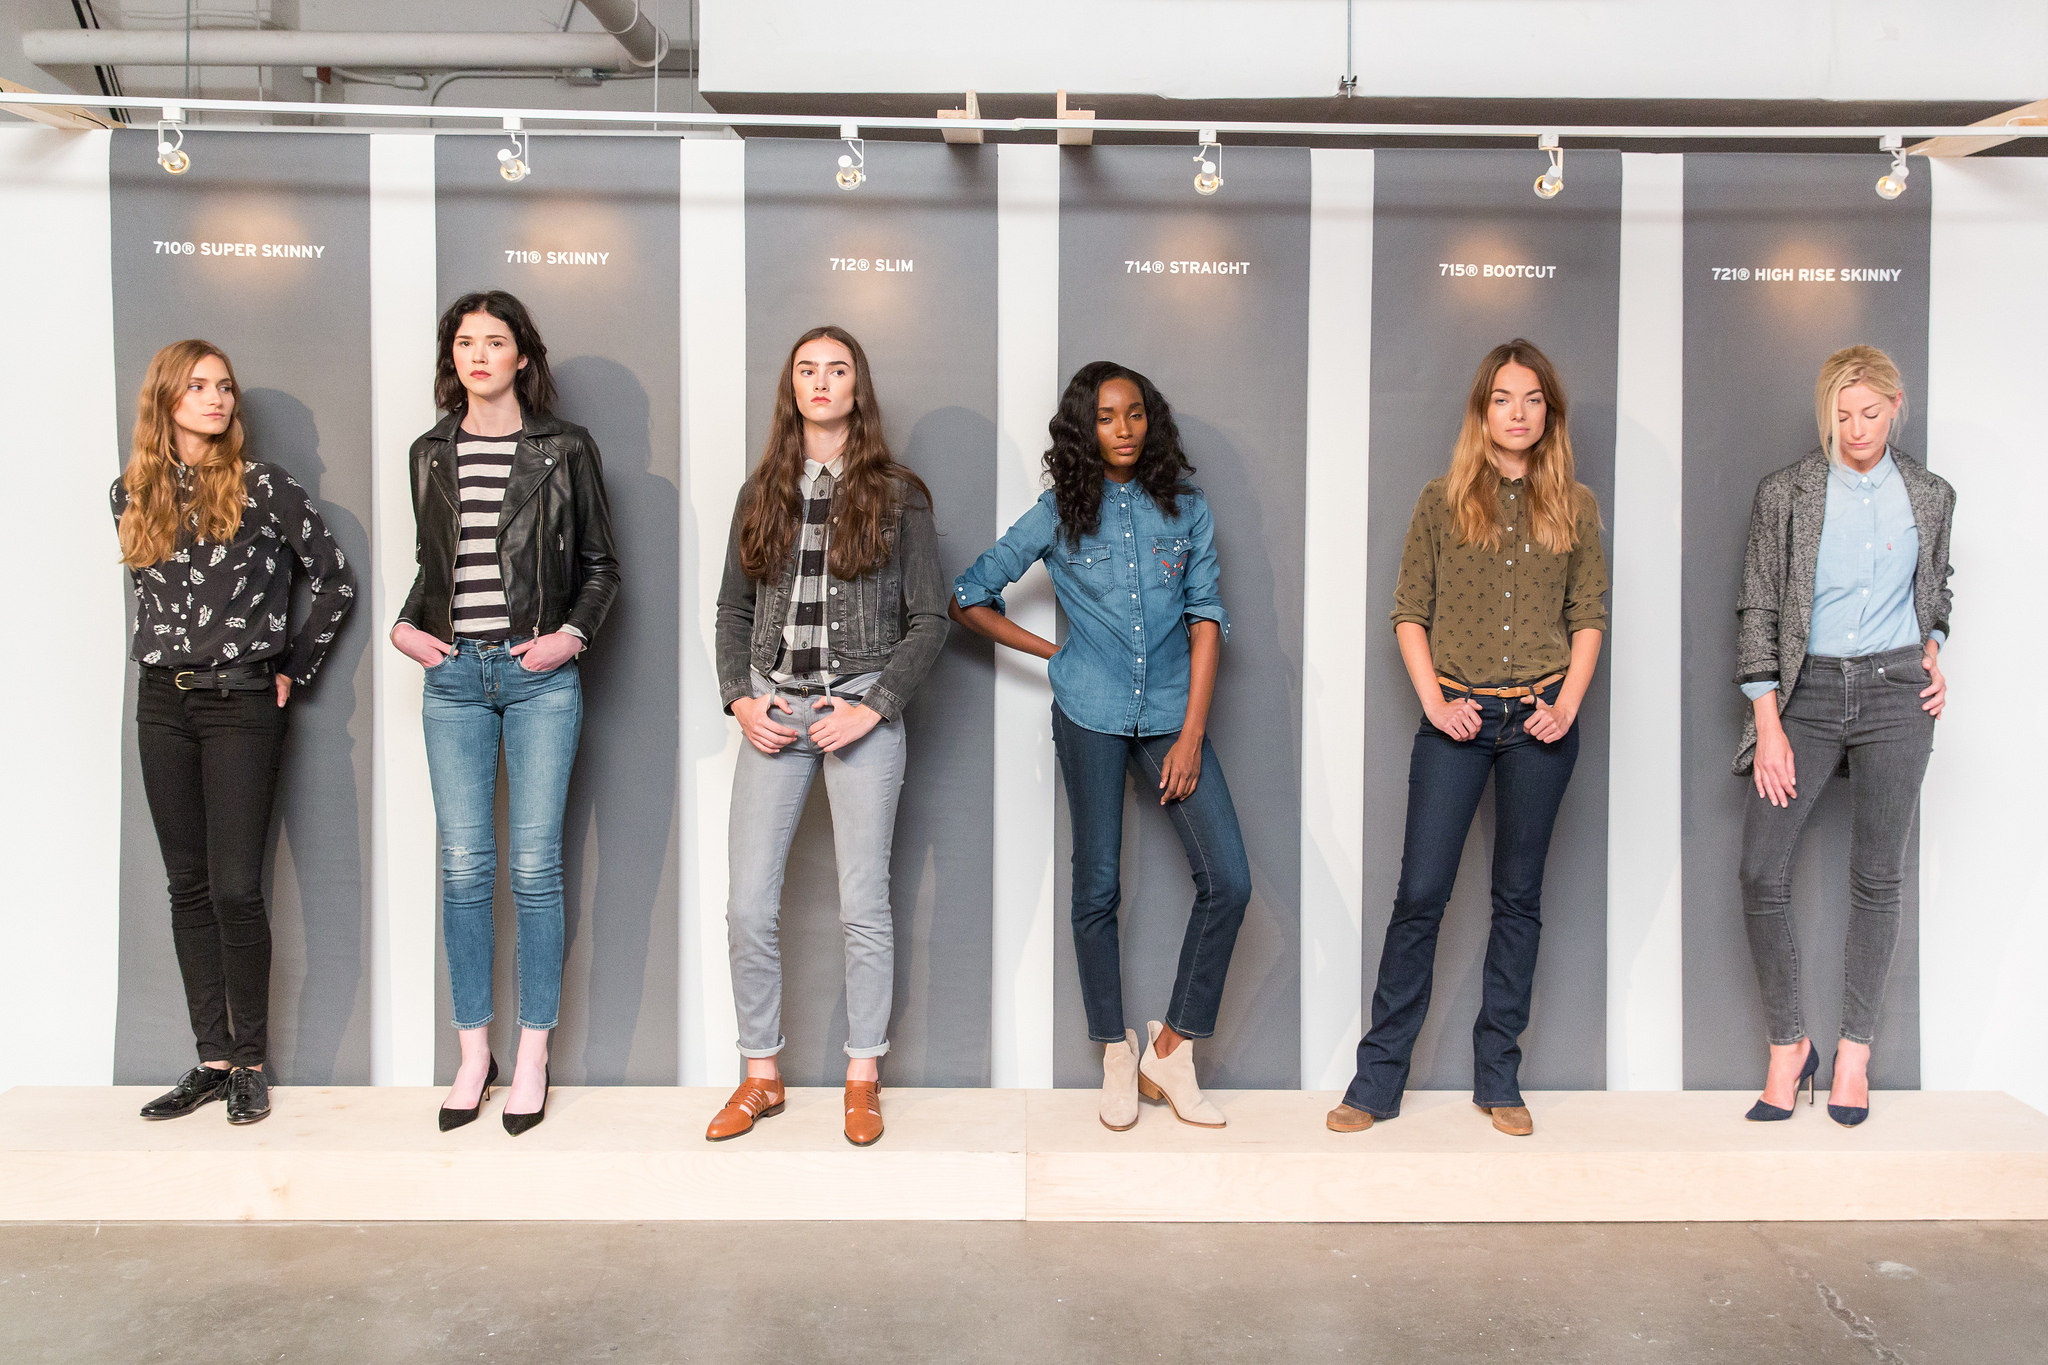 Inspired - Levi Strauss & Co : Levi Strauss & Co